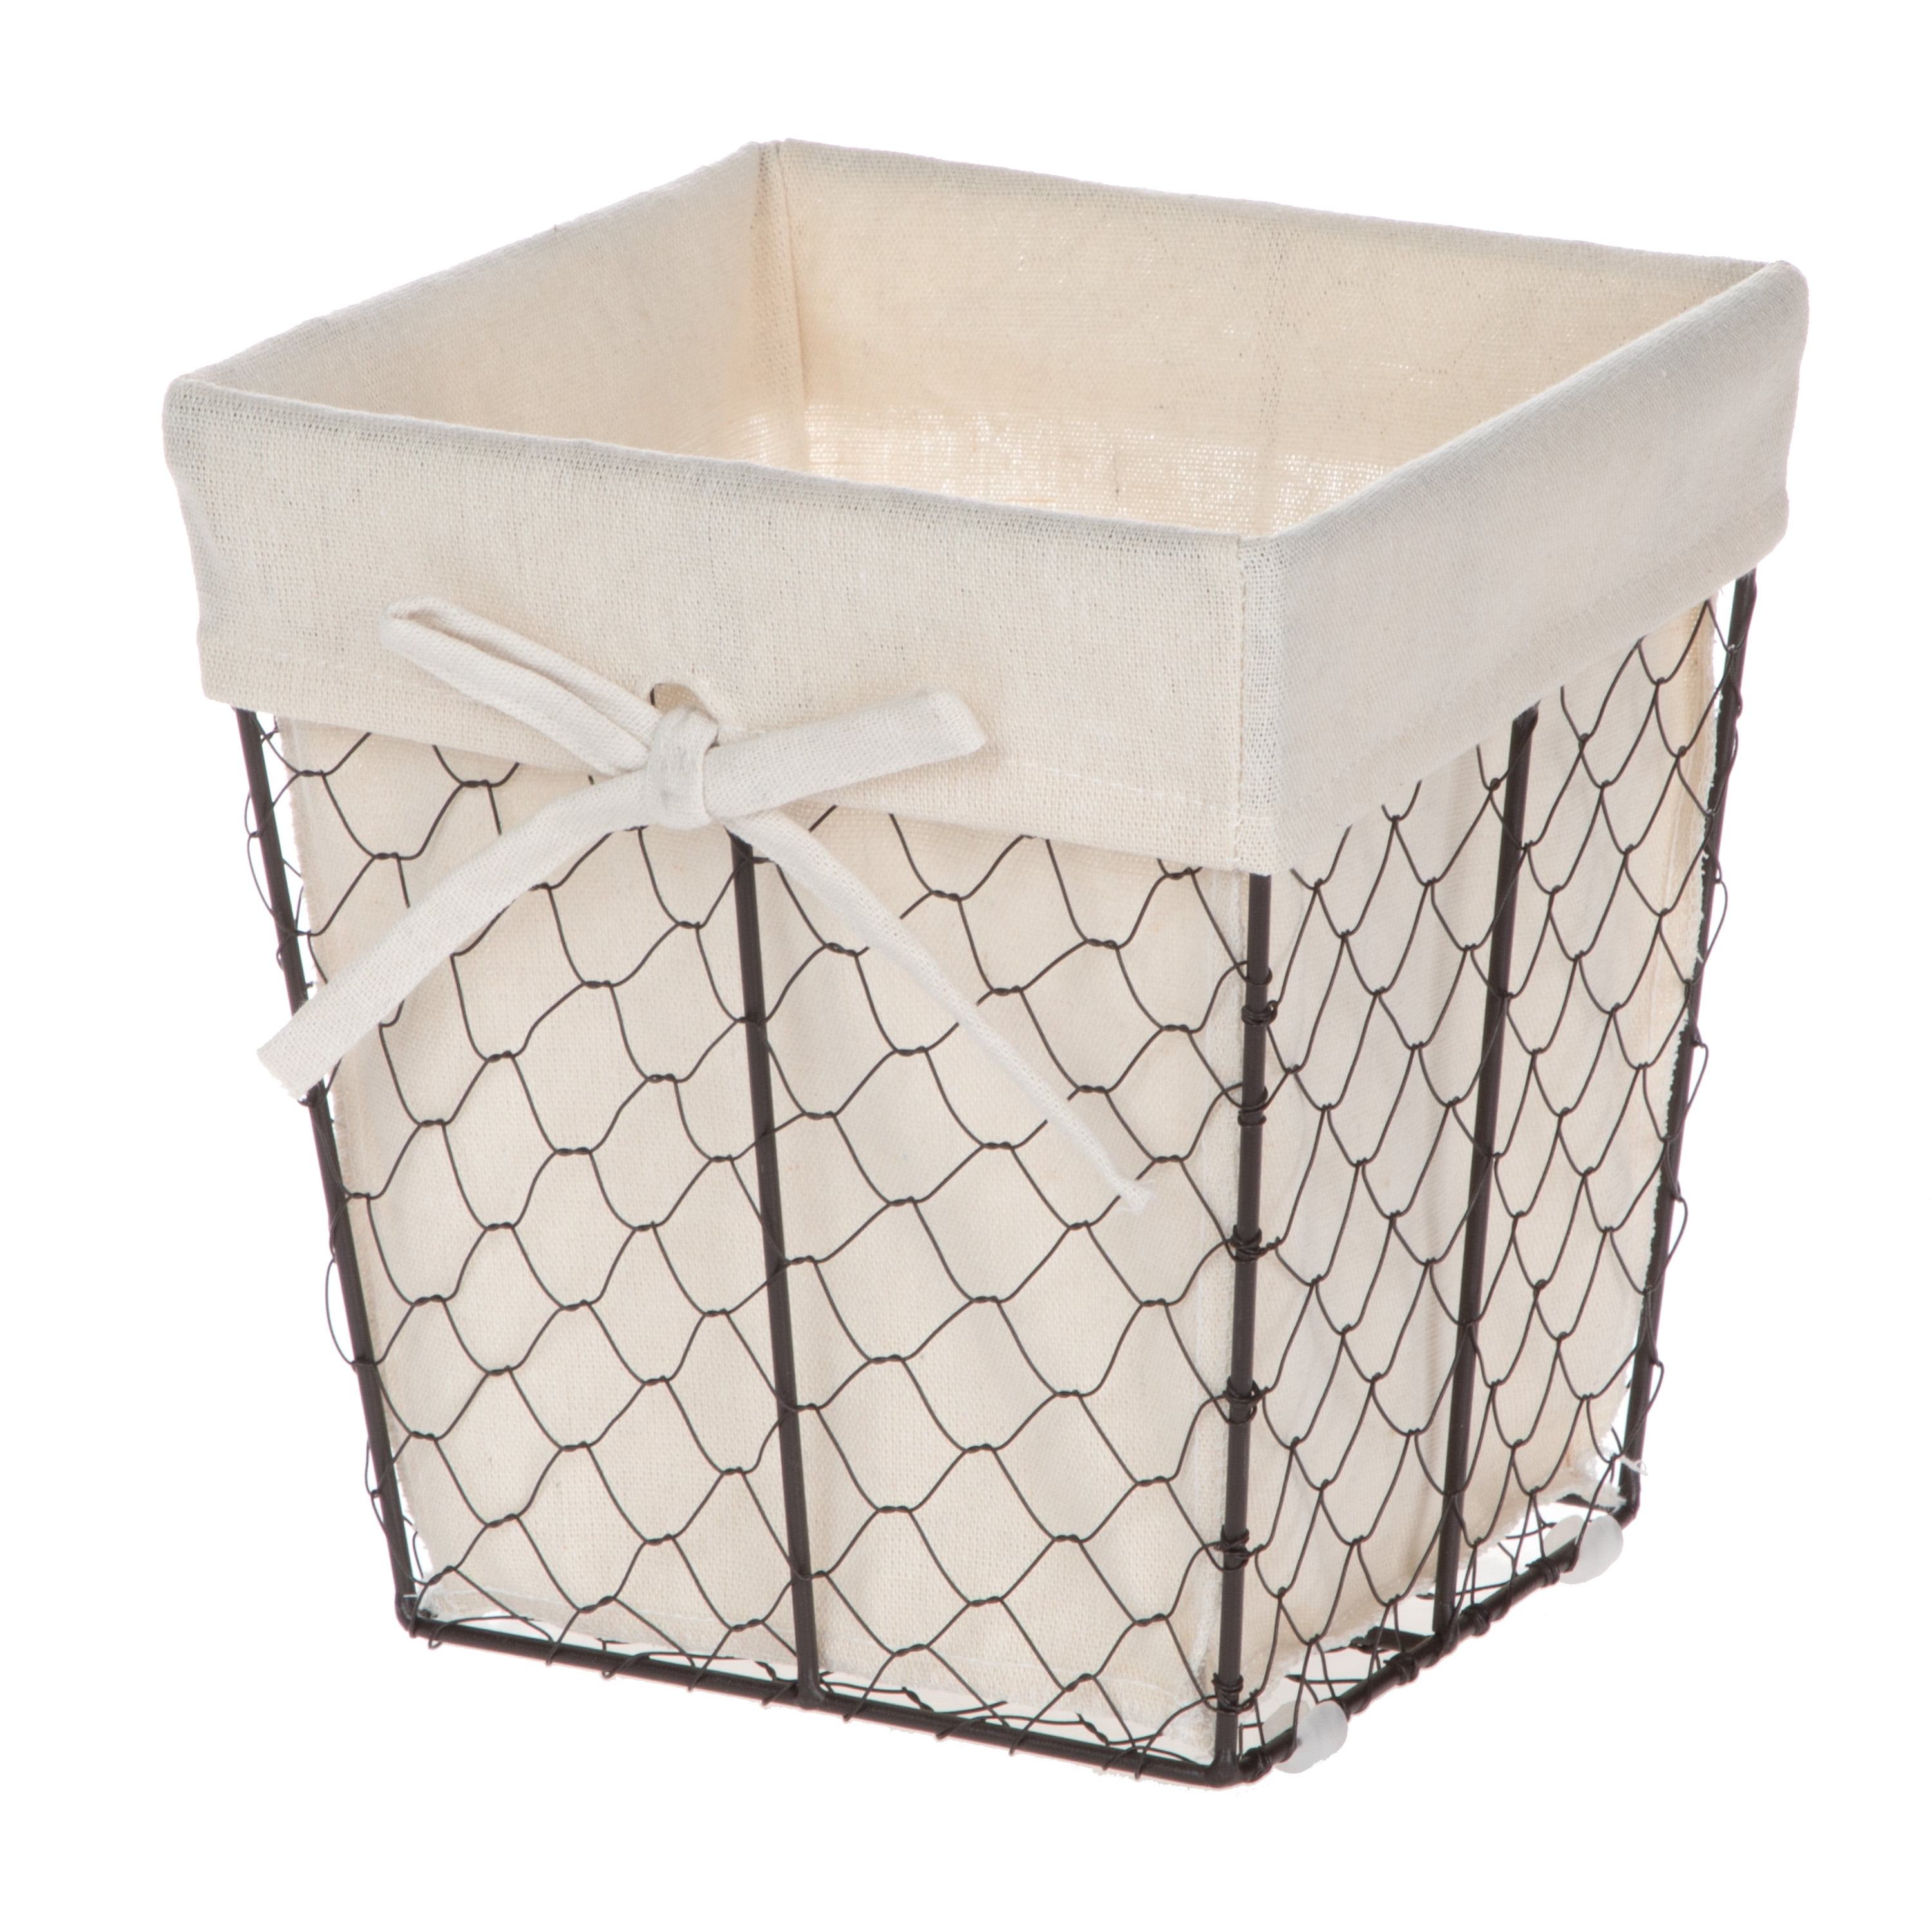 Details about   Chicken Wire Basket Canvas Lining Wooden Handle Farmhouse 8.75 Inches 